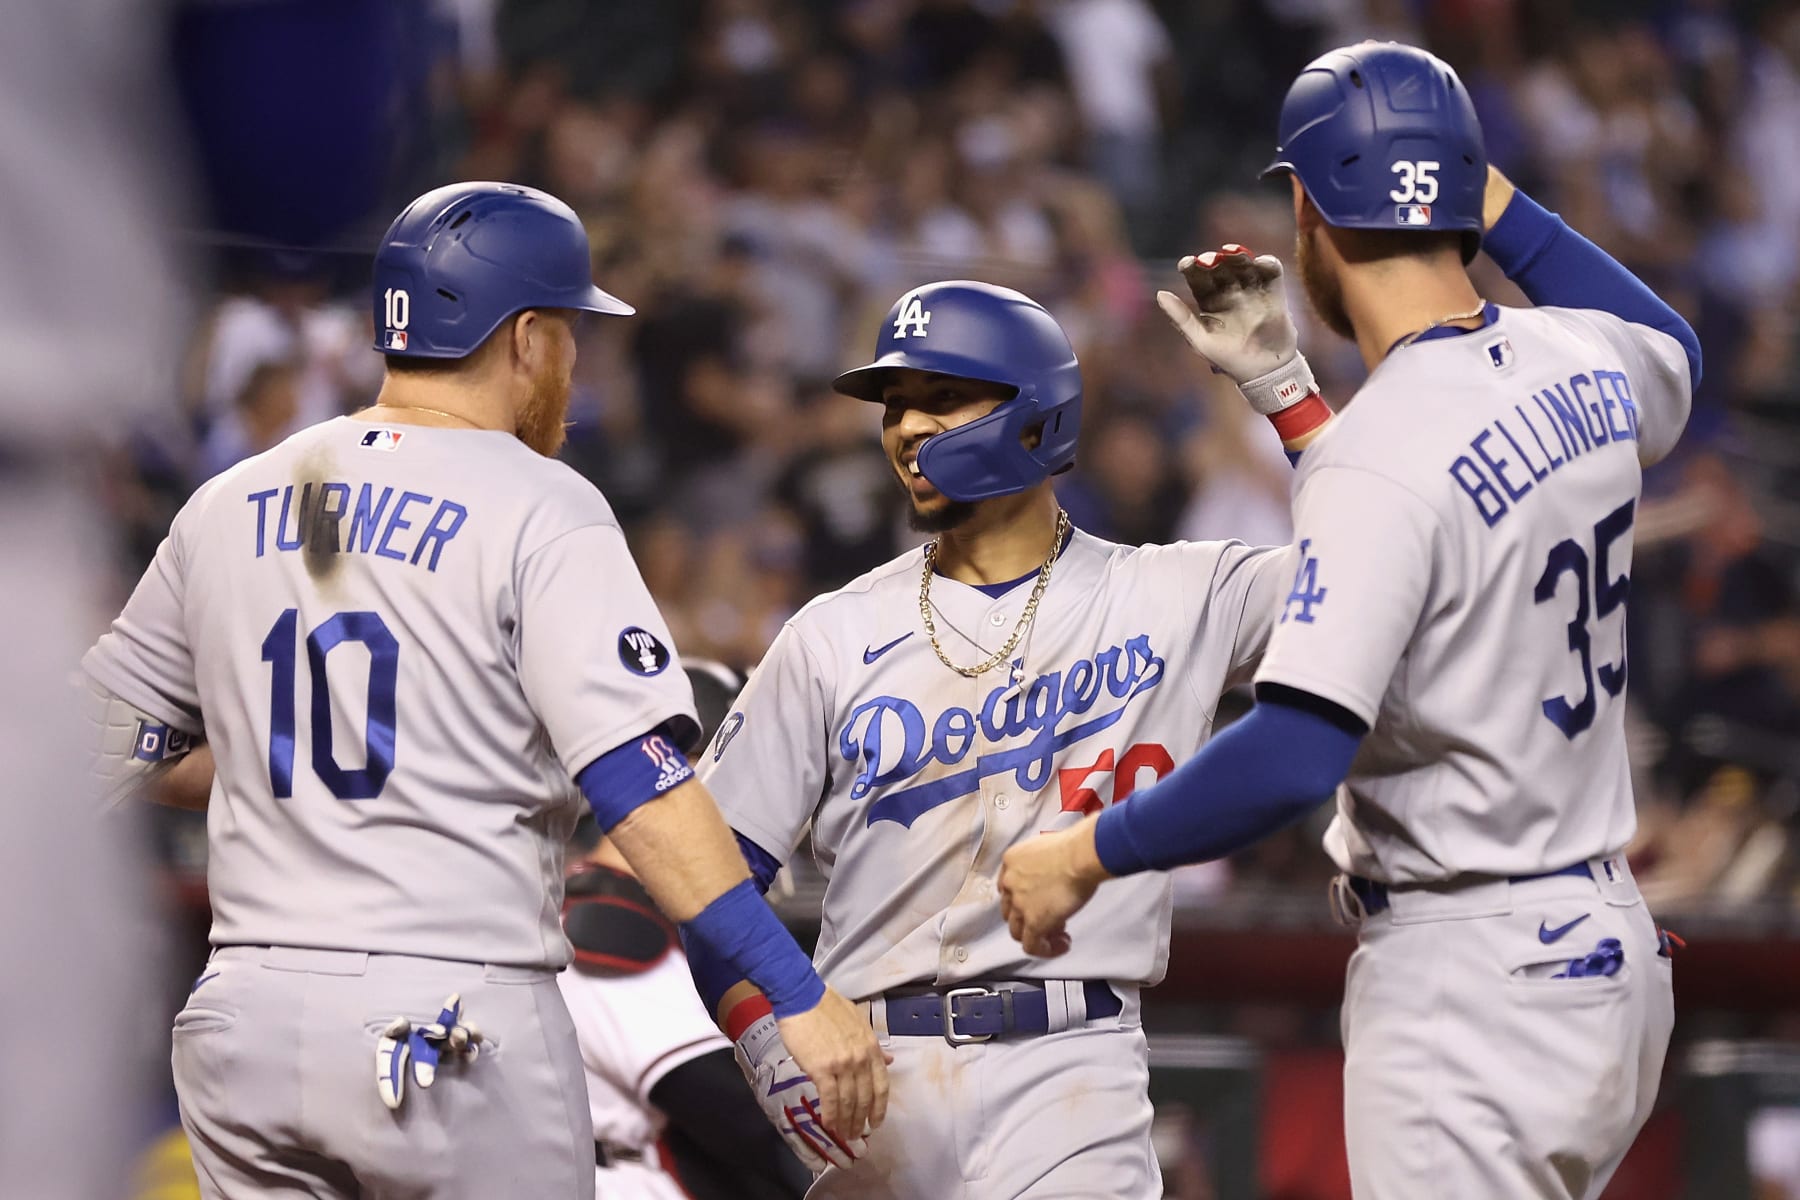 CLINCH WATCH 2021 - Now With Even More Clinches! - Weekend Series Review -  Dodger Yard